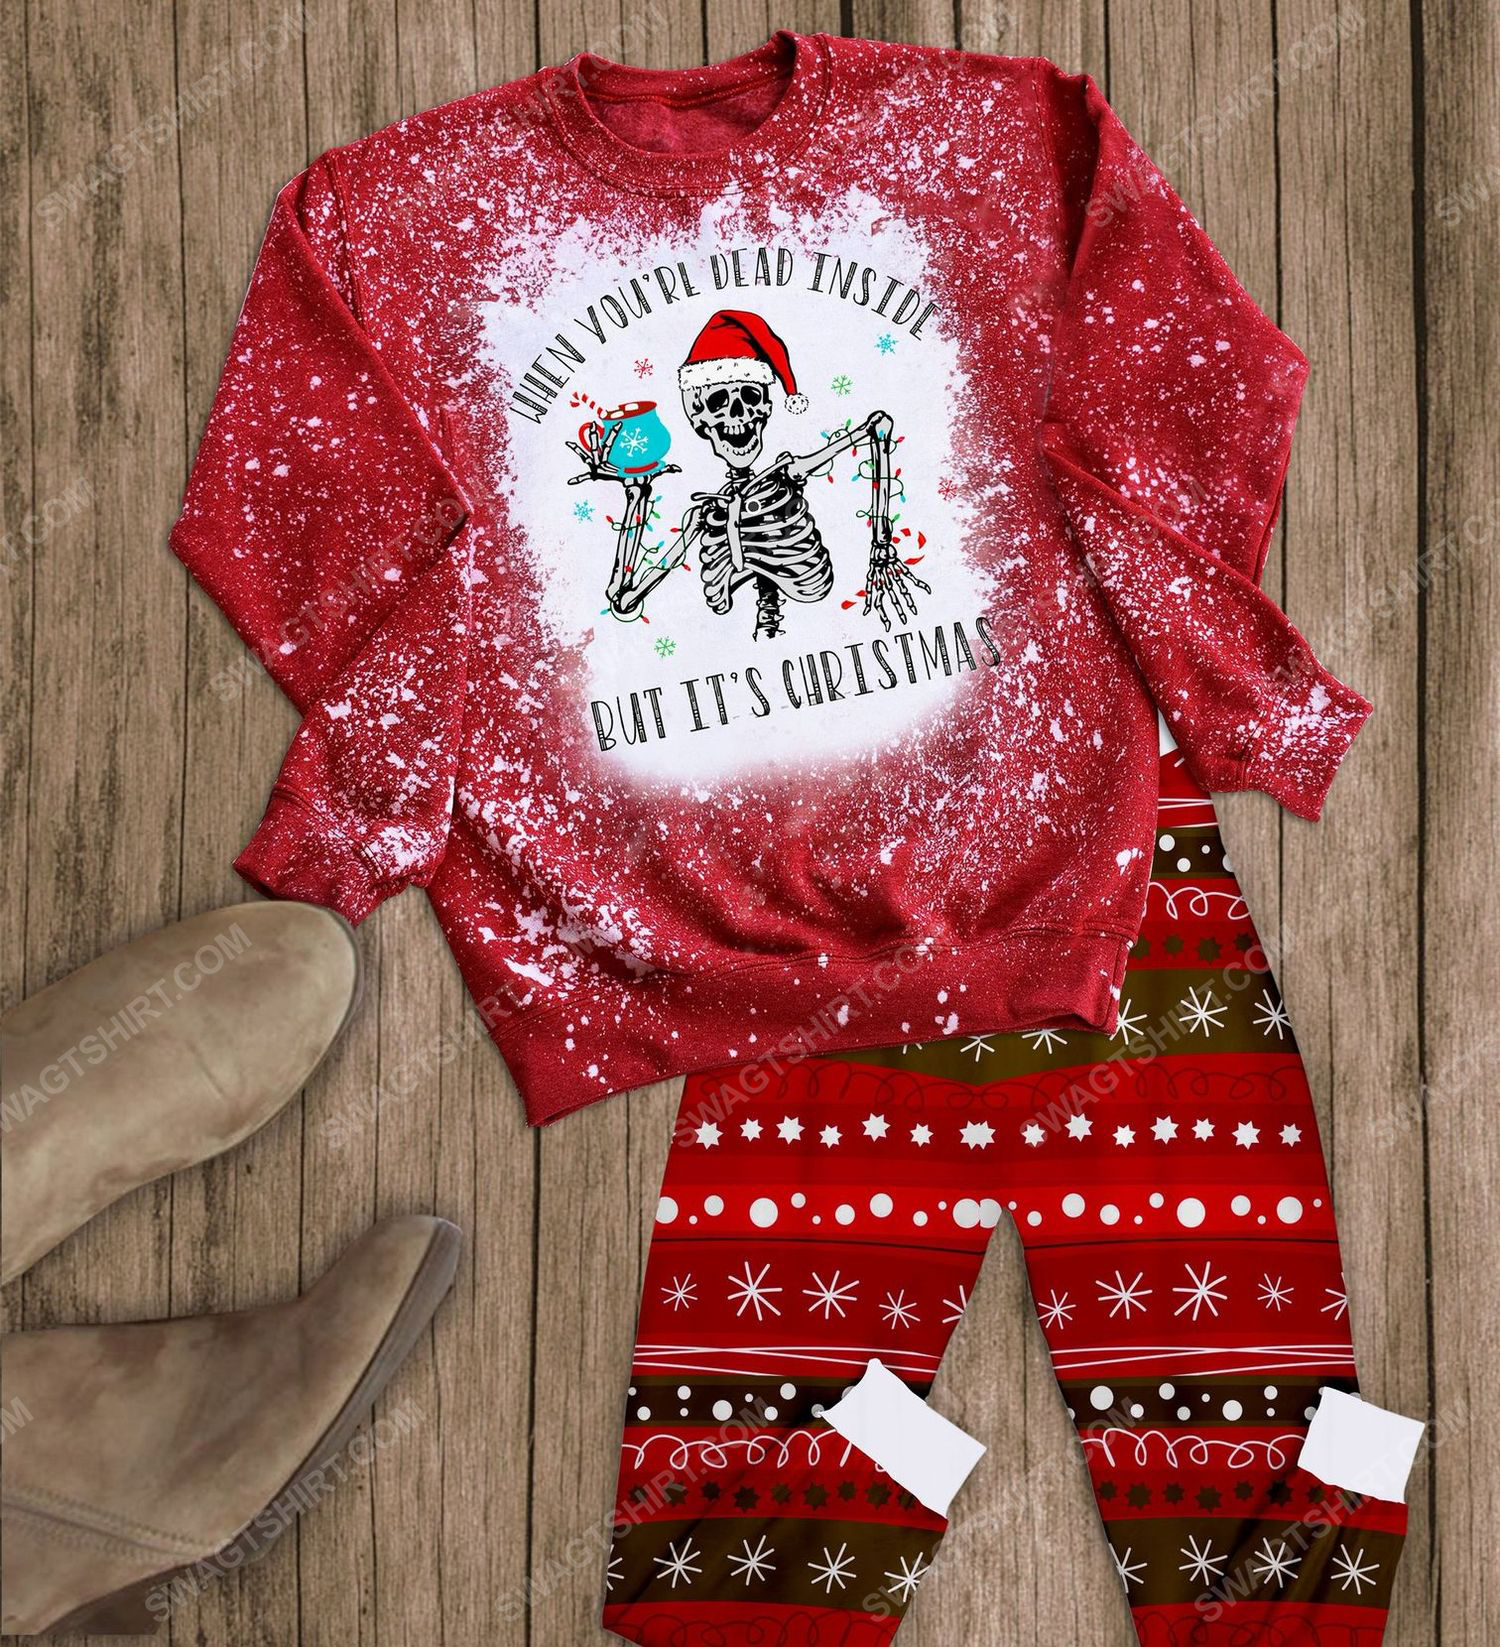 When you're dead inside but it's christmas full print pajamas set